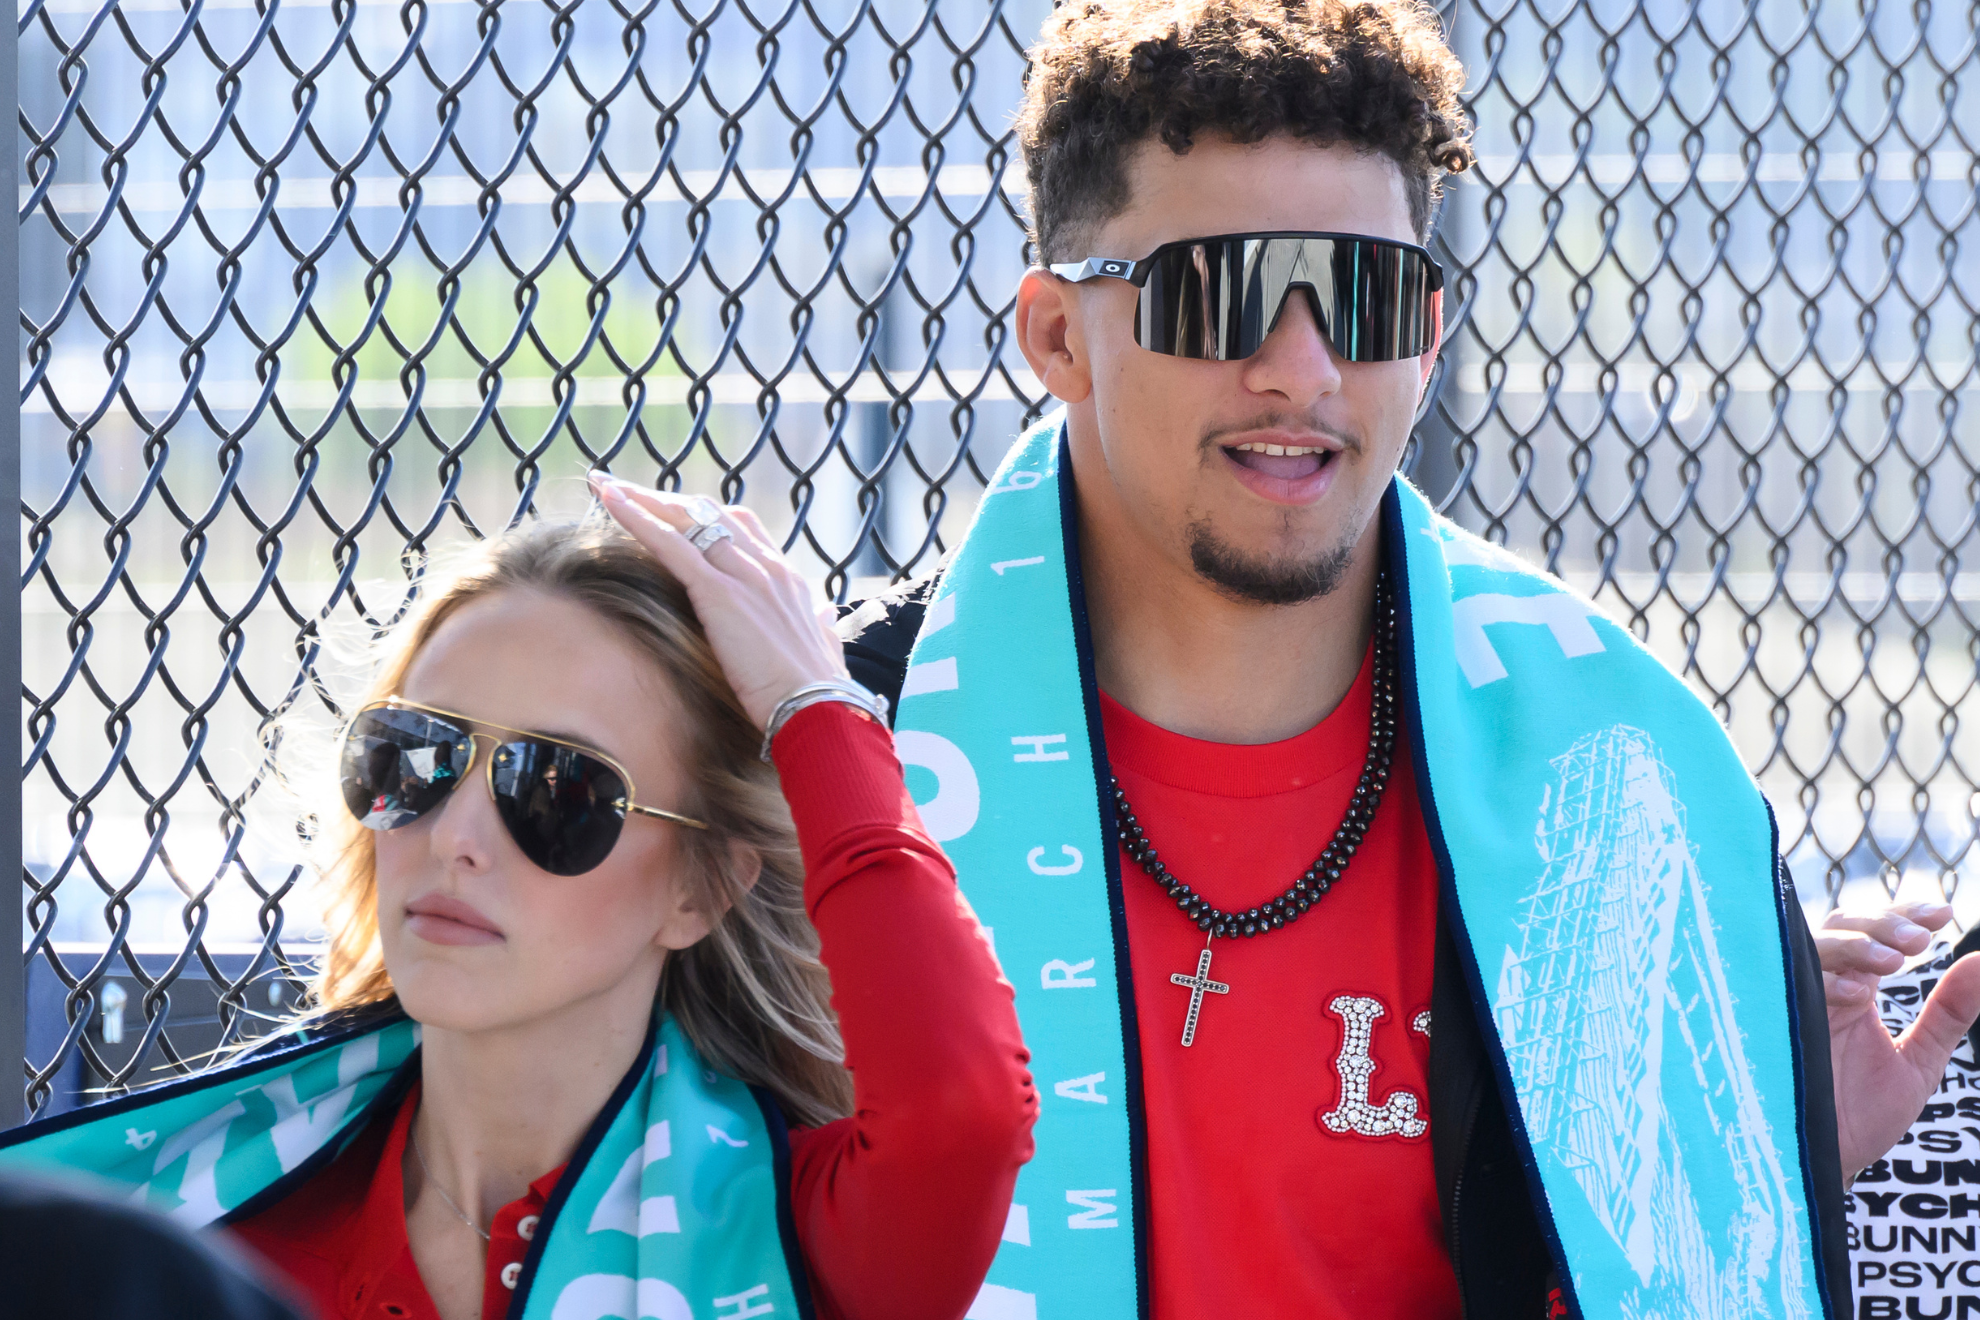 Brittany Mahomes returns quickly to blonde: Did Patrick not like her red hair color?